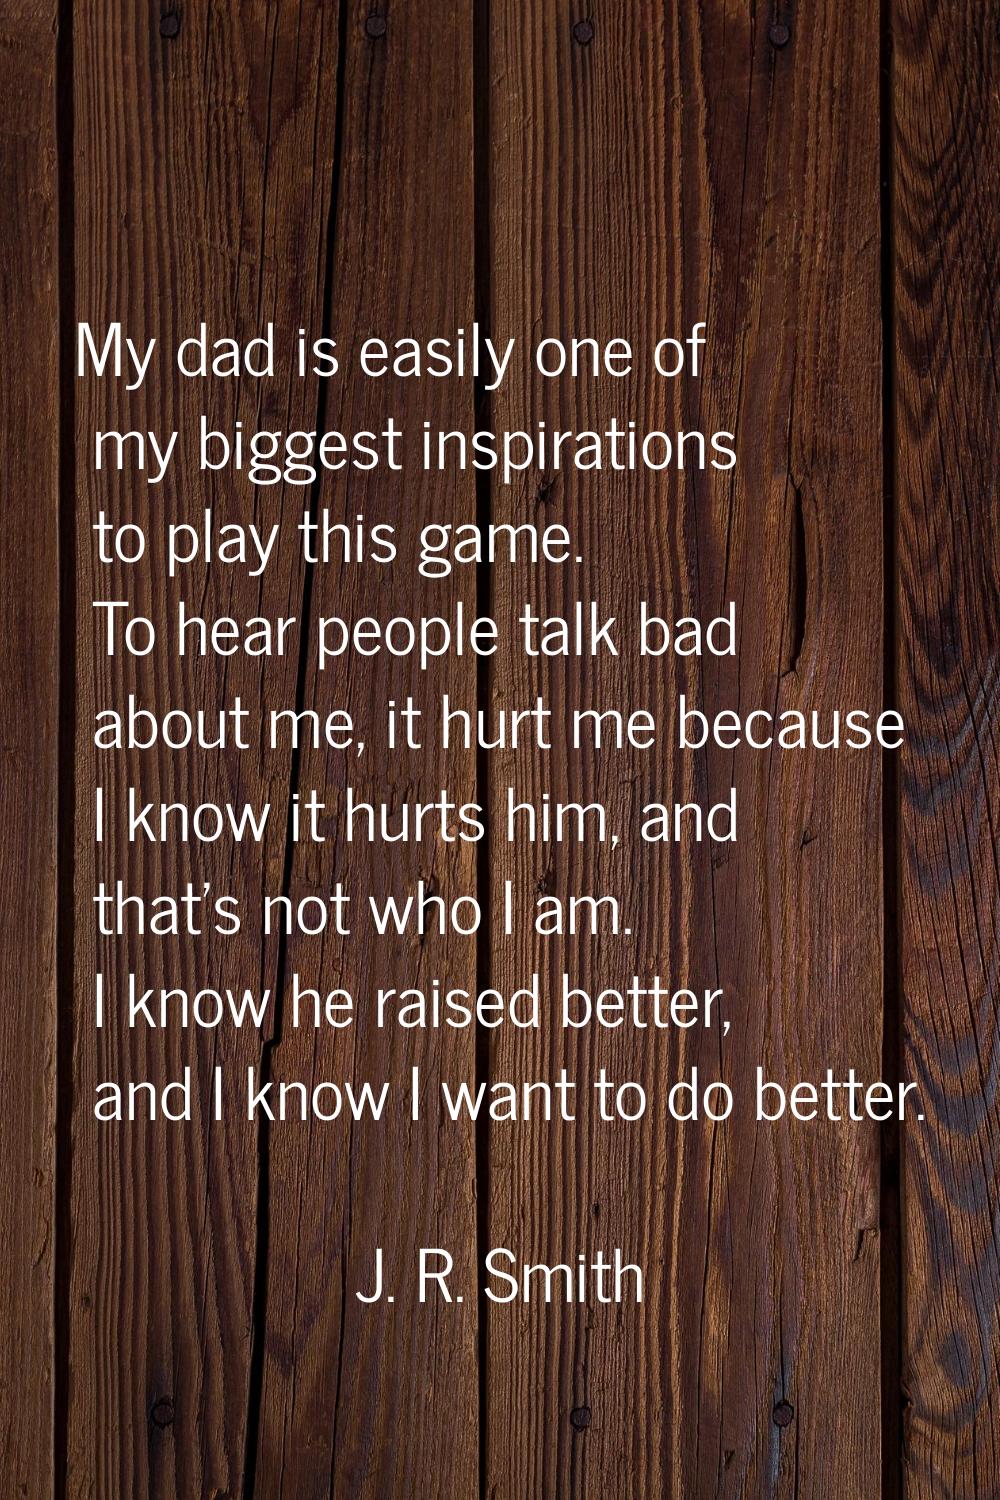 My dad is easily one of my biggest inspirations to play this game. To hear people talk bad about me